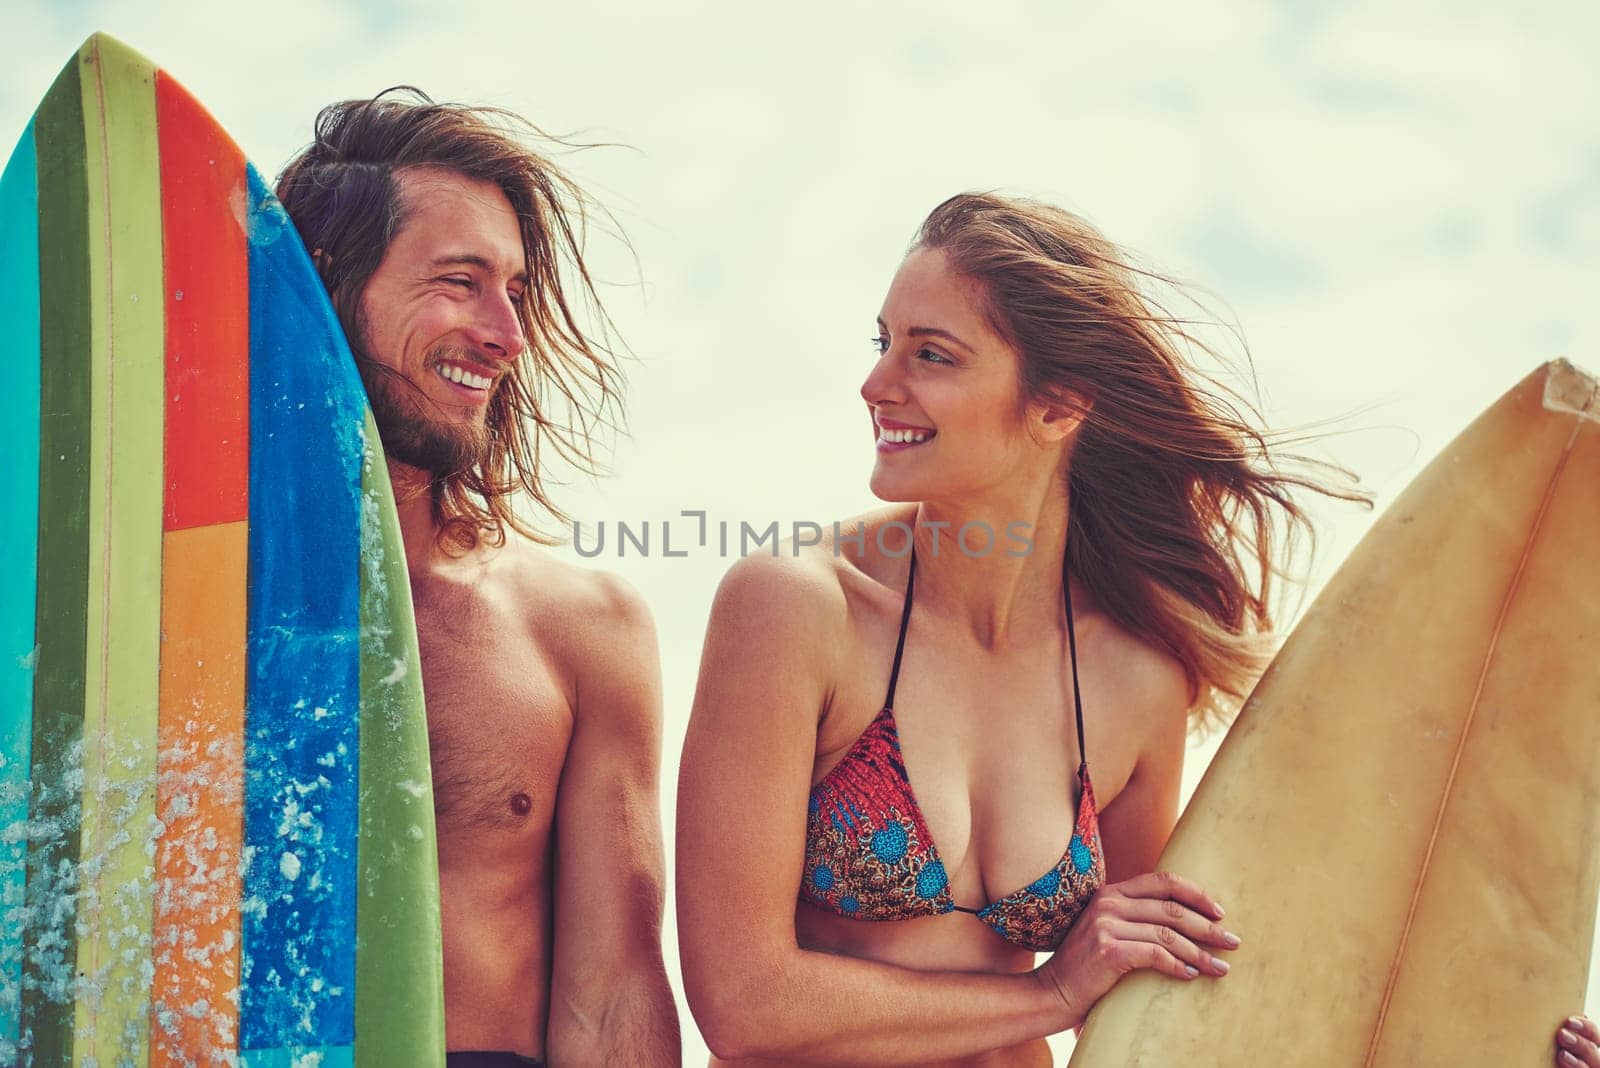 She had me at surfing. a young couple spending the day out surfing